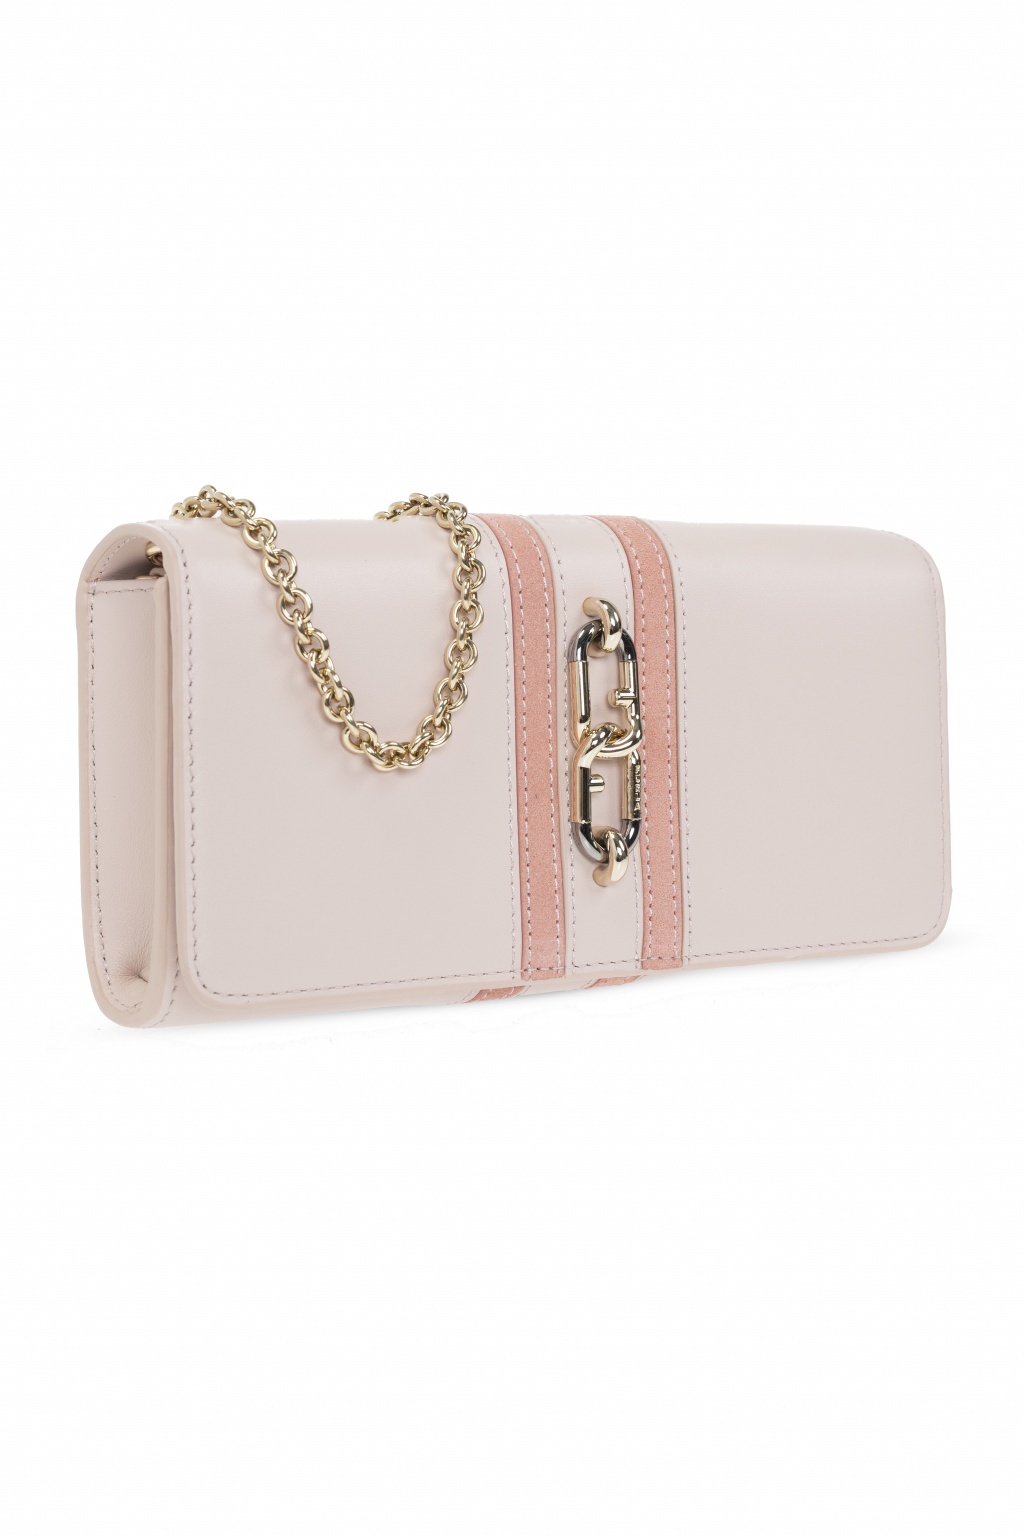 Furla ‘Sirena’ wallet with chain